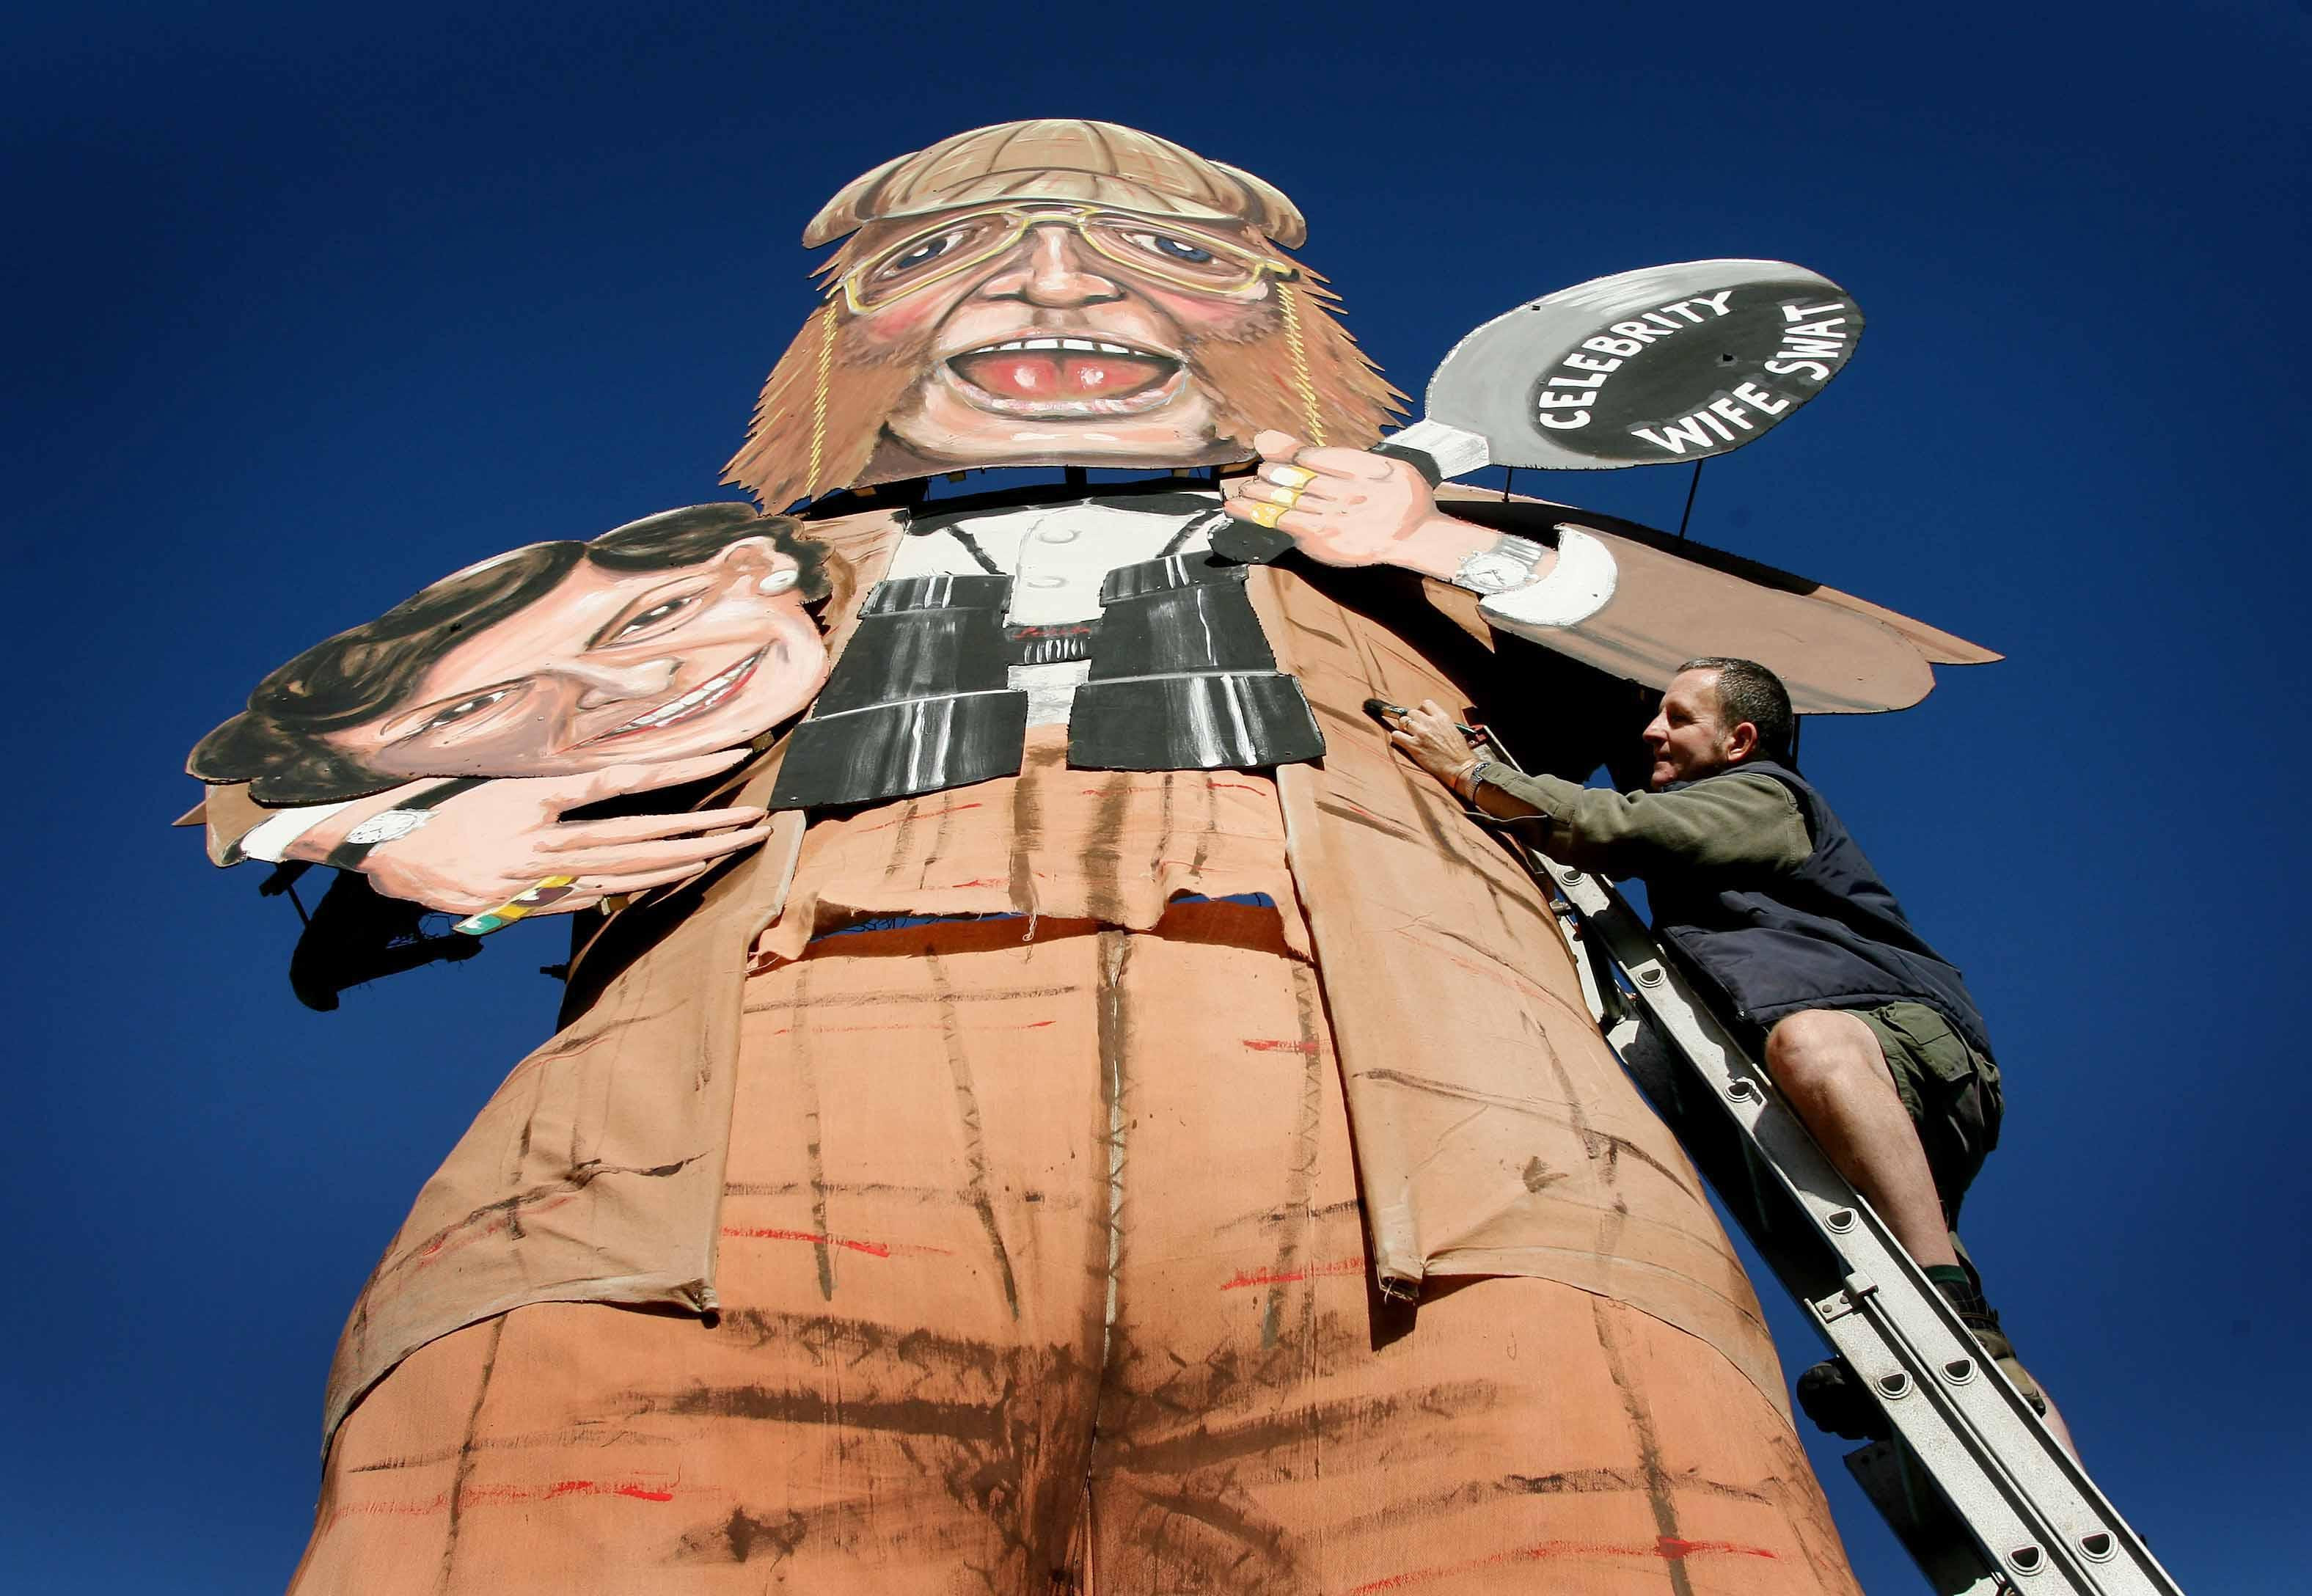 Barry Stableford of the Edenbridge Bonfire Society in Kent puts the final touches to their celebrity guy, racing tipster John McCririck and former Tory minister Edwina Currie, in 2006